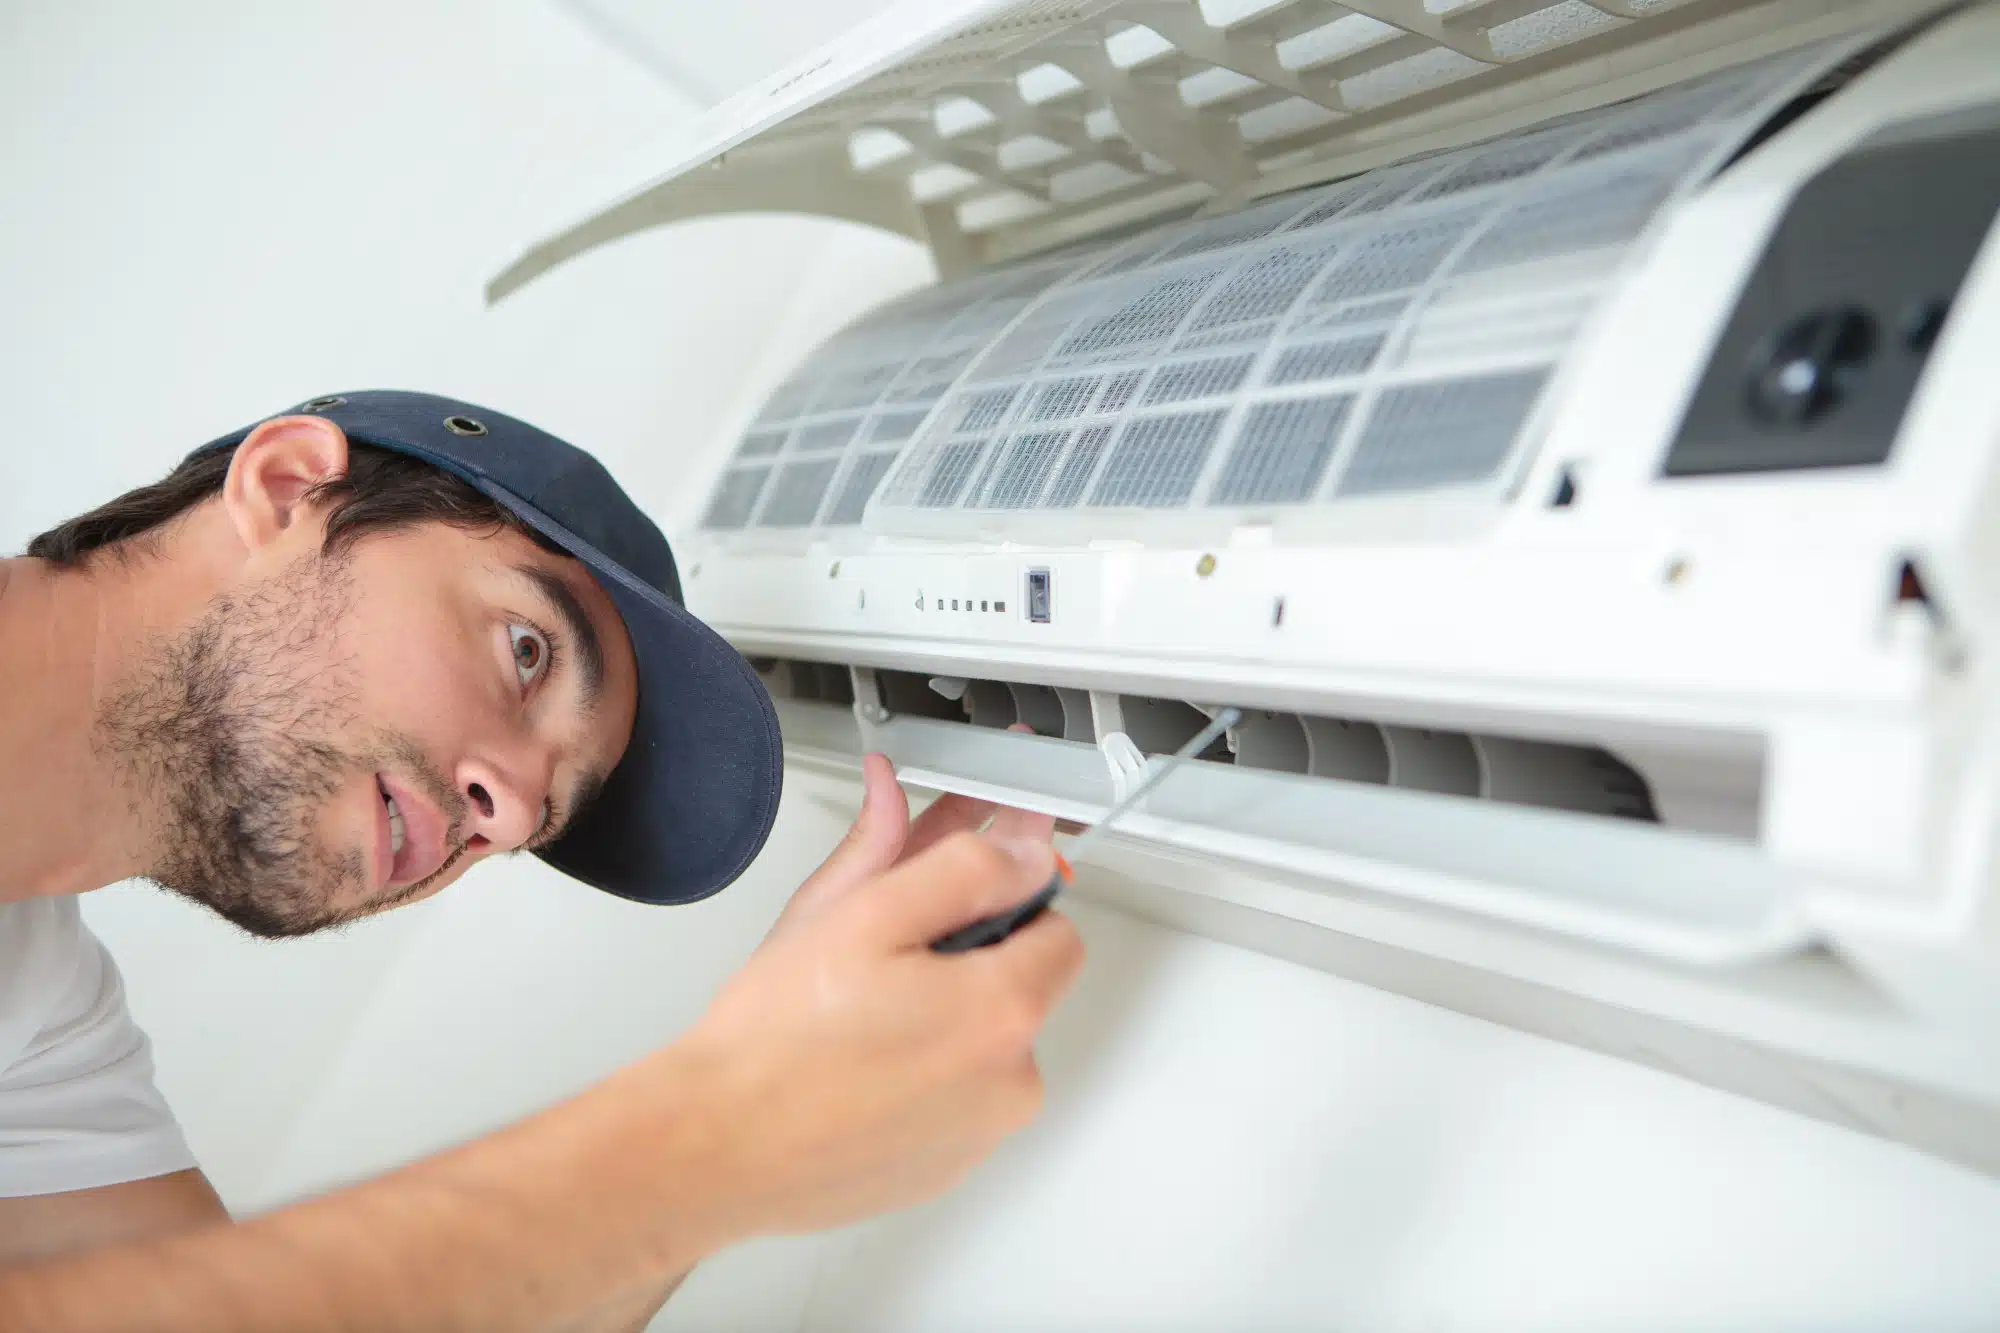 How To Tell If An Air Conditioner Is Broken